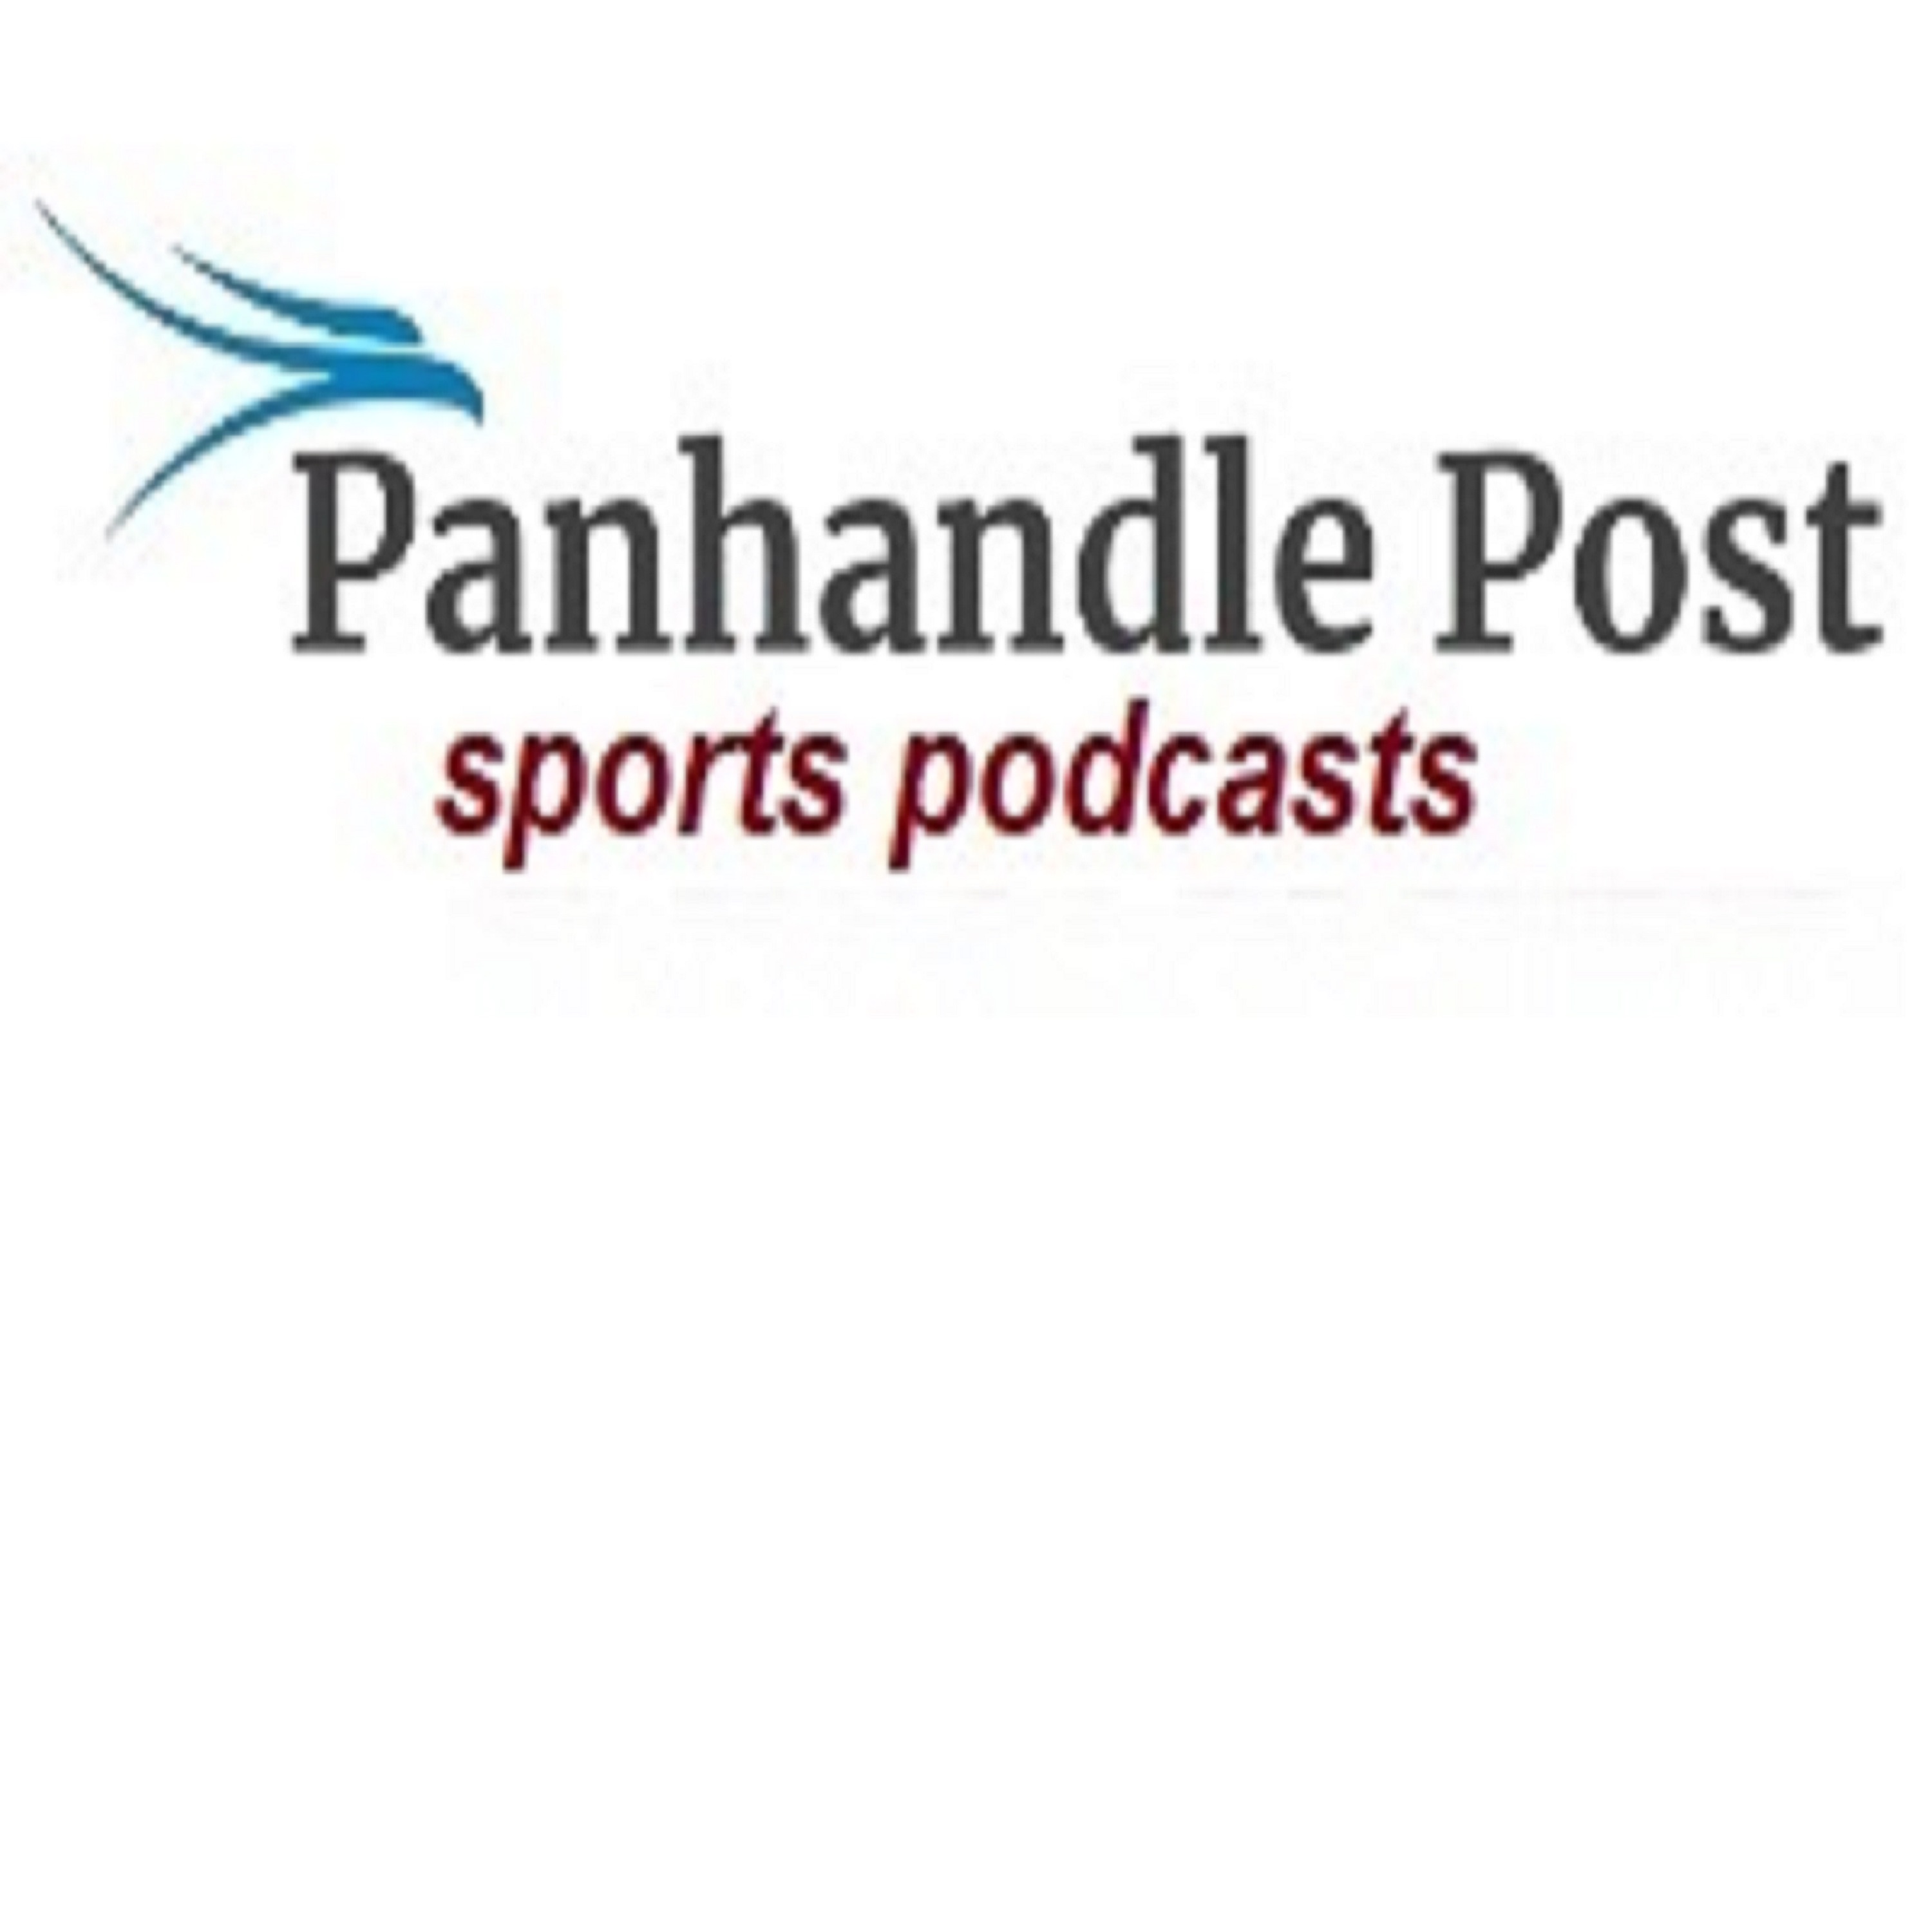 The Jay Long Show, CSC Sports Journal & Coverage of CSC Athletics!